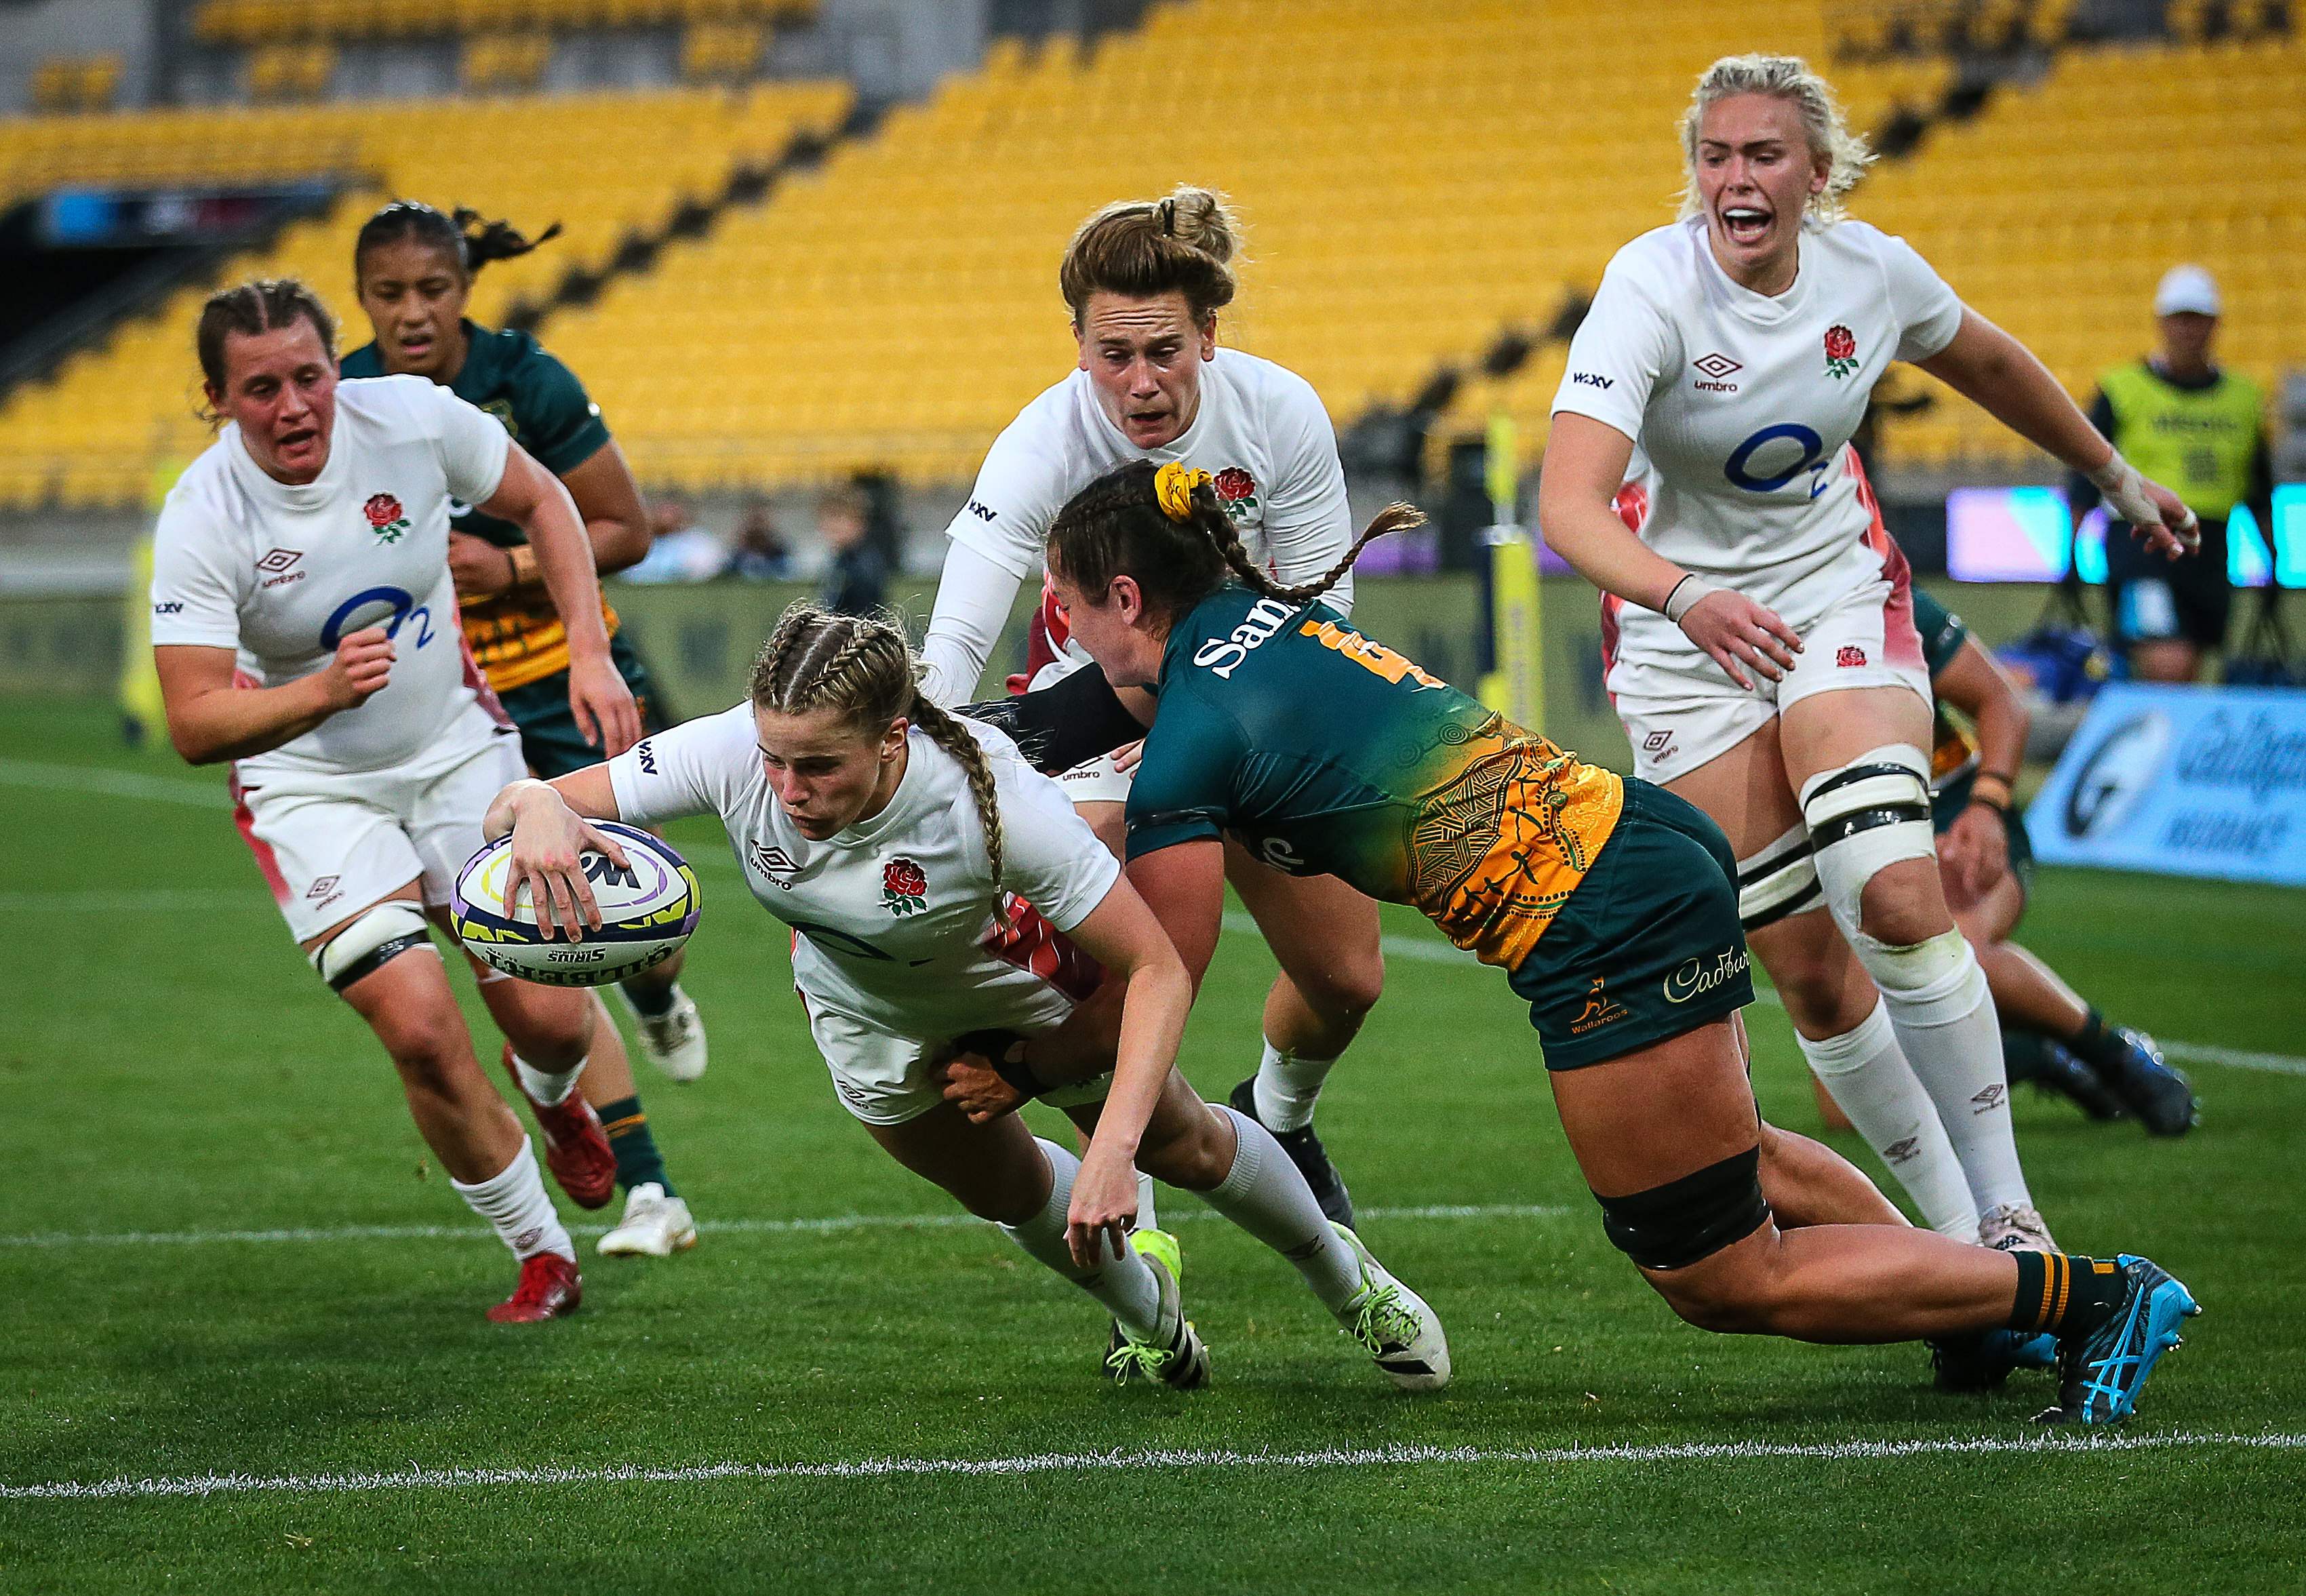 The WXV is a new-look women’s rugby competition